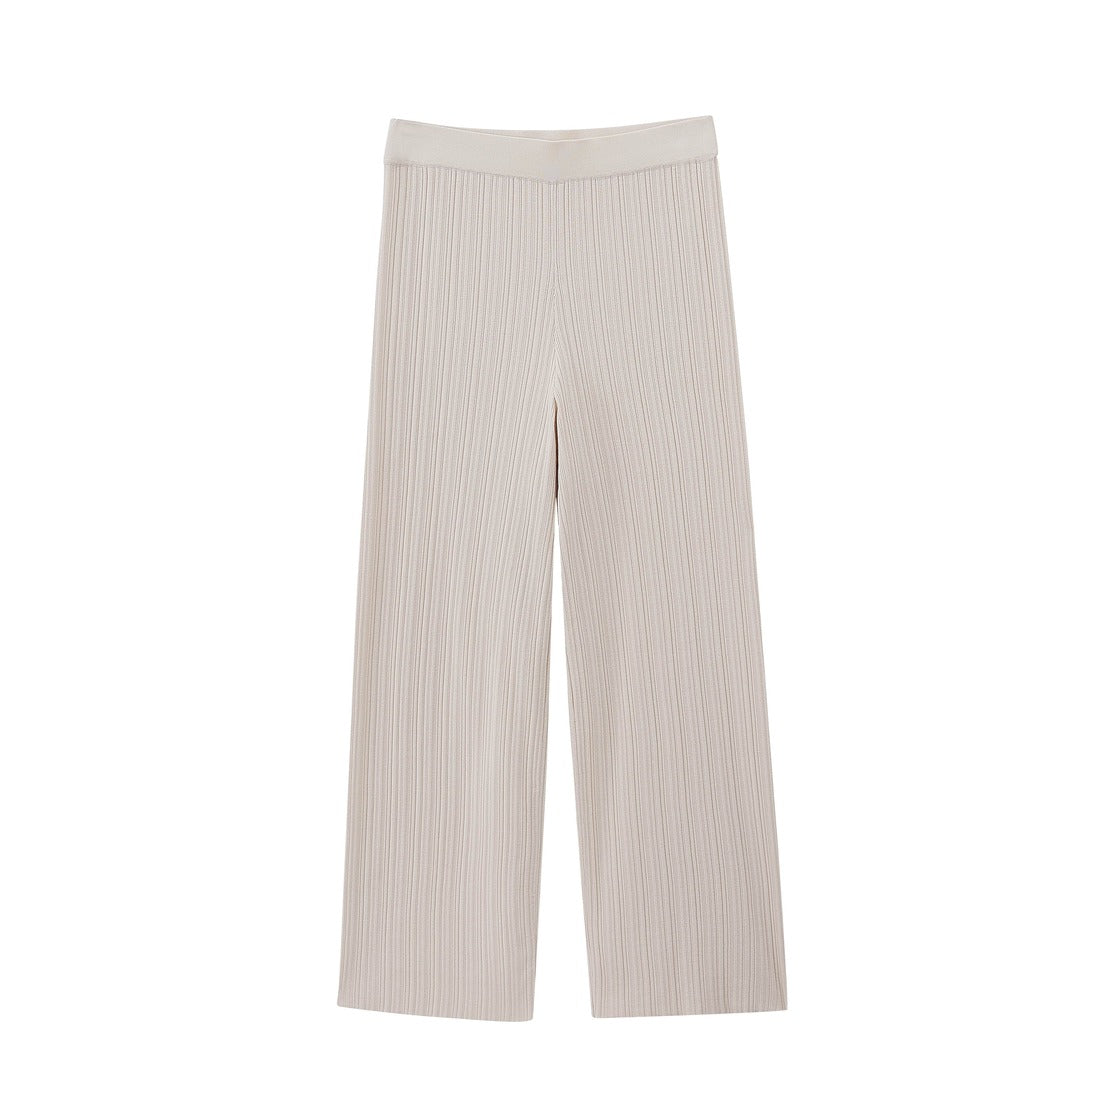 Flat lay image of off white knit pants